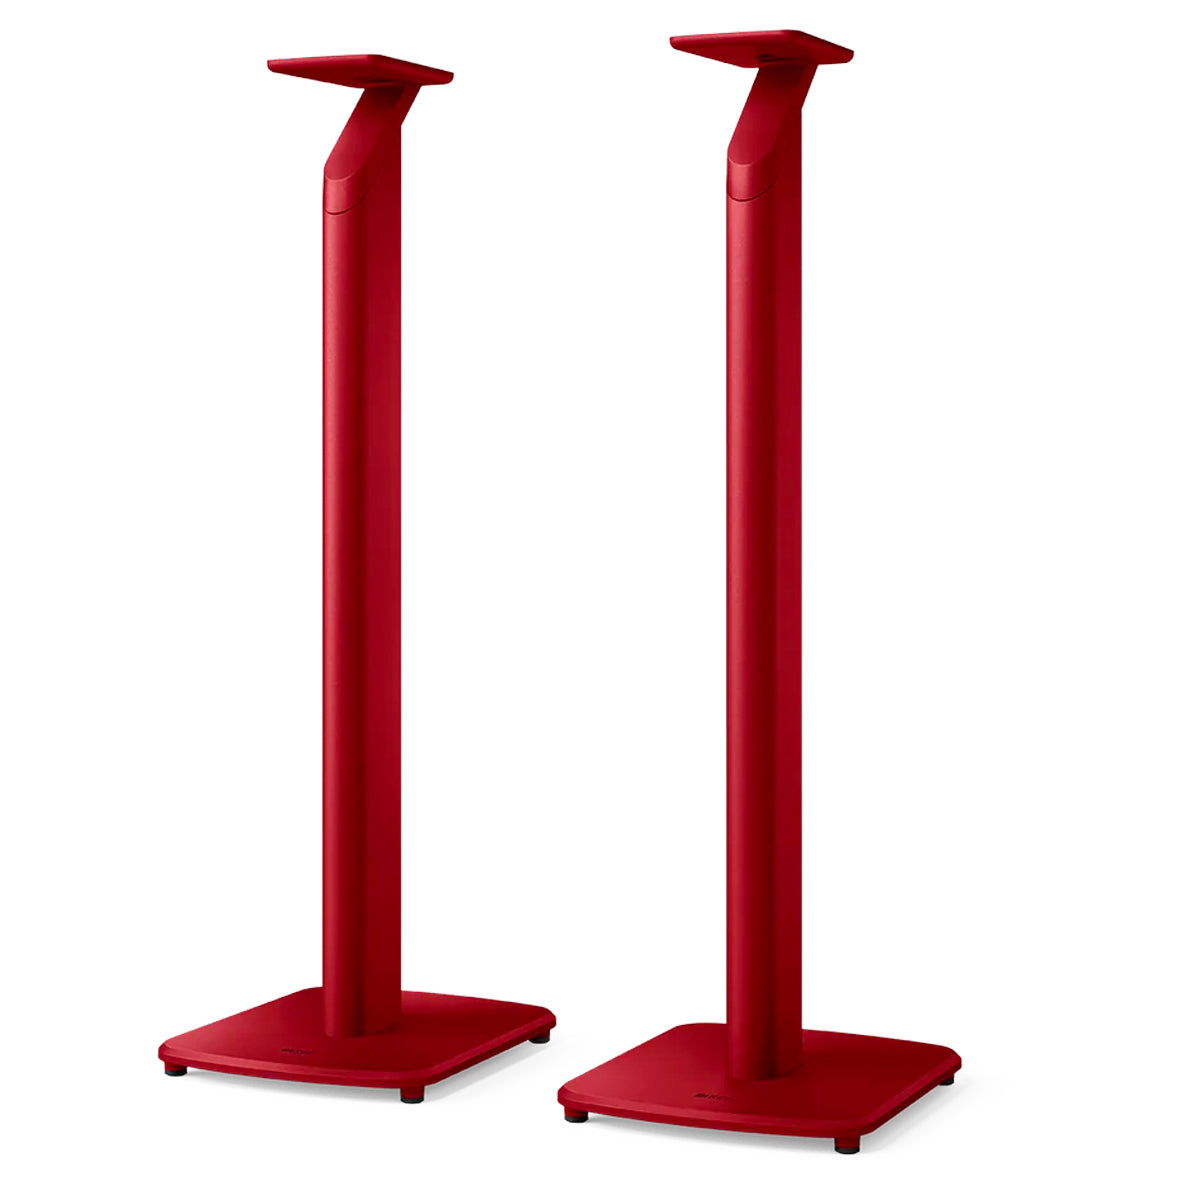 KEF S1 Speaker Stands for LSX Speakers - Red - The Audio Experts